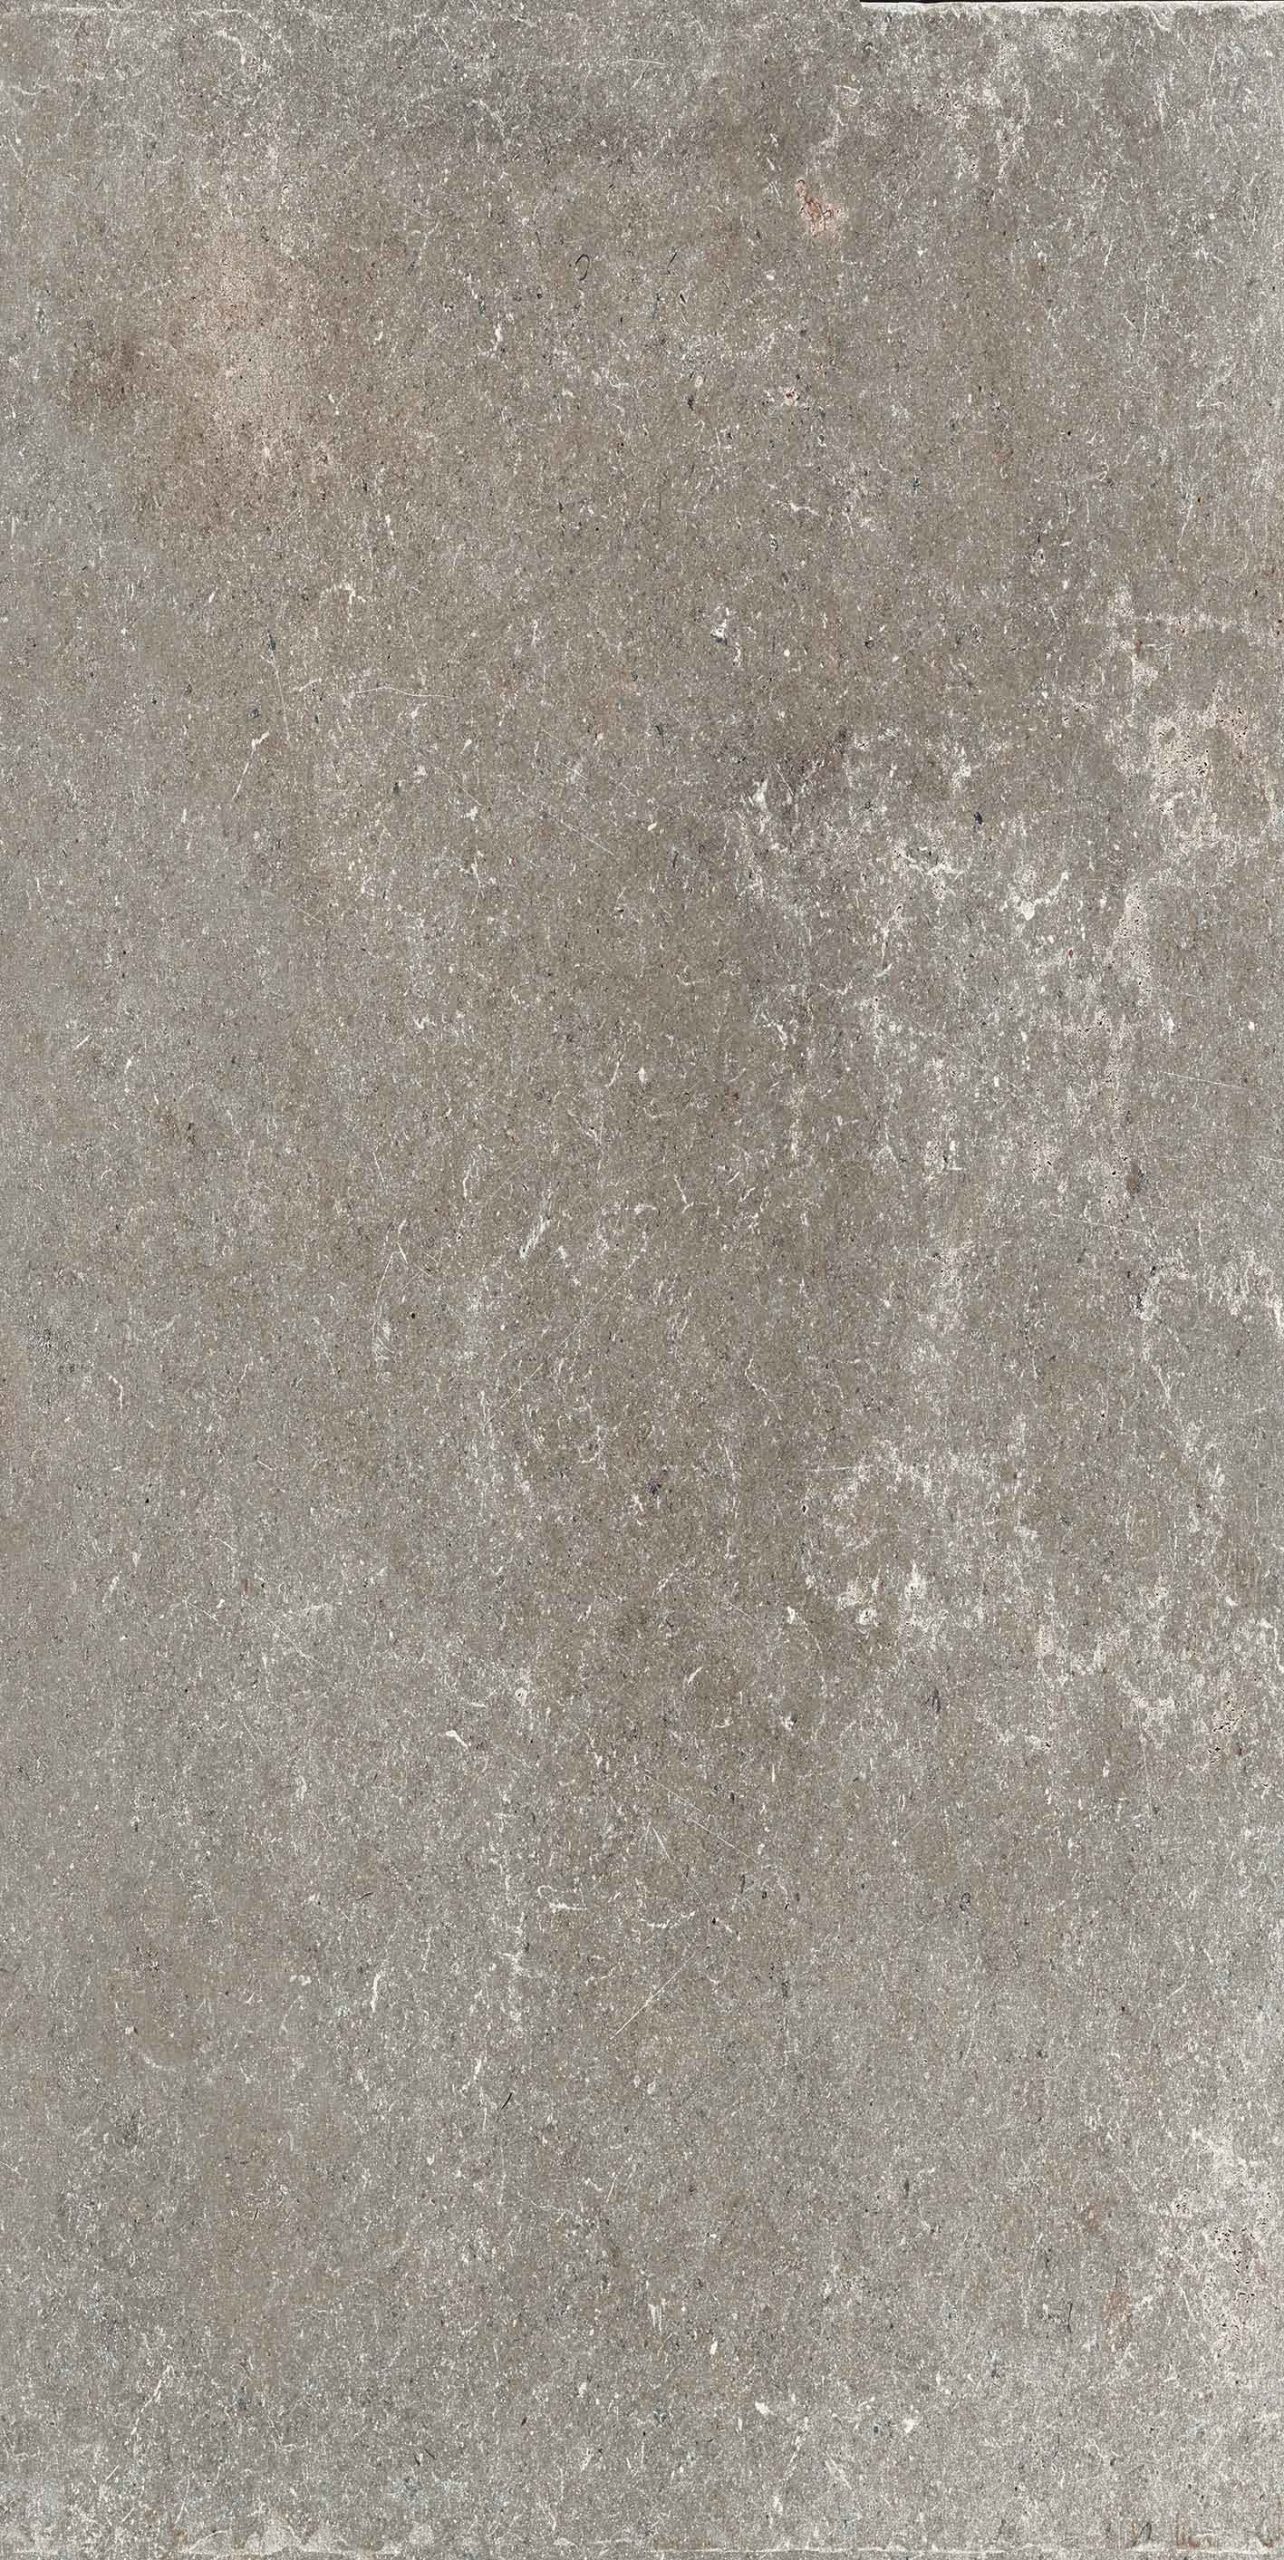 Stontech 4.0 Stone 03 Slate-hammered 20mm 60 x 120